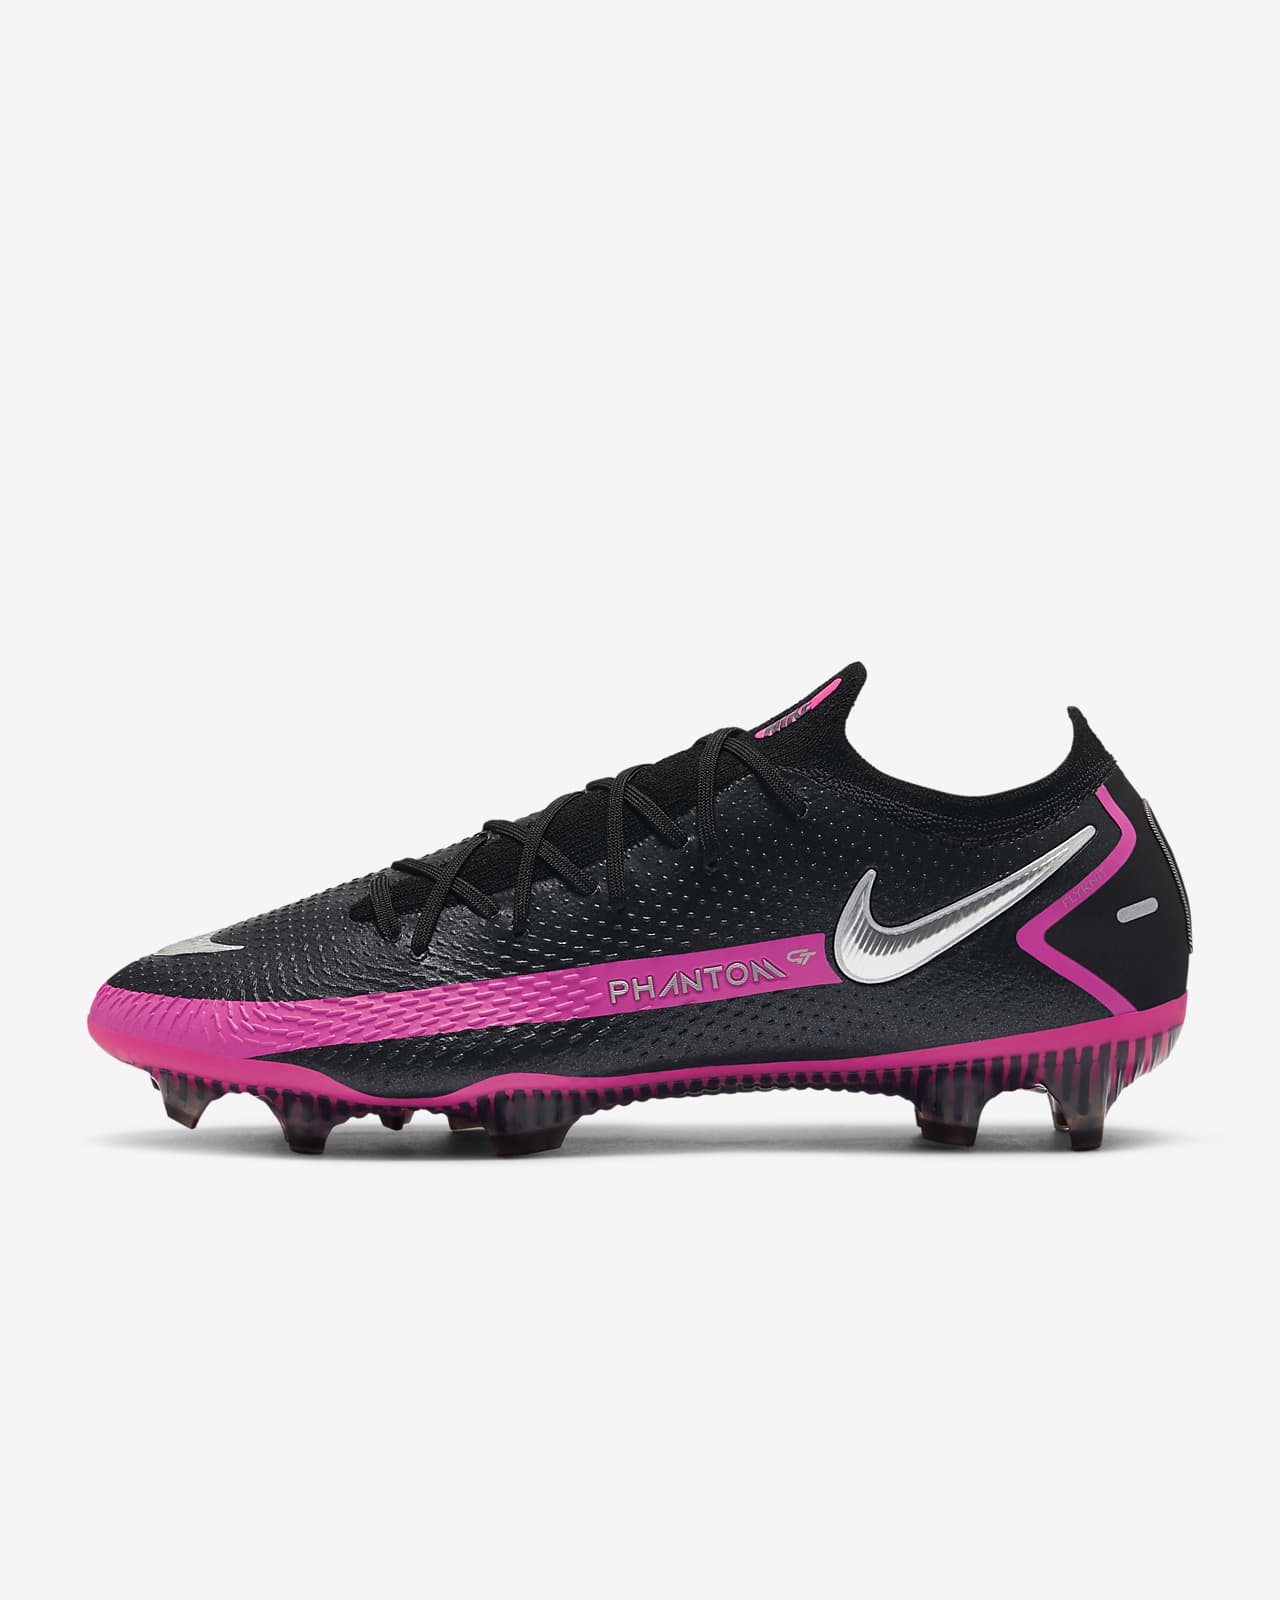 pink soccer cleats nike